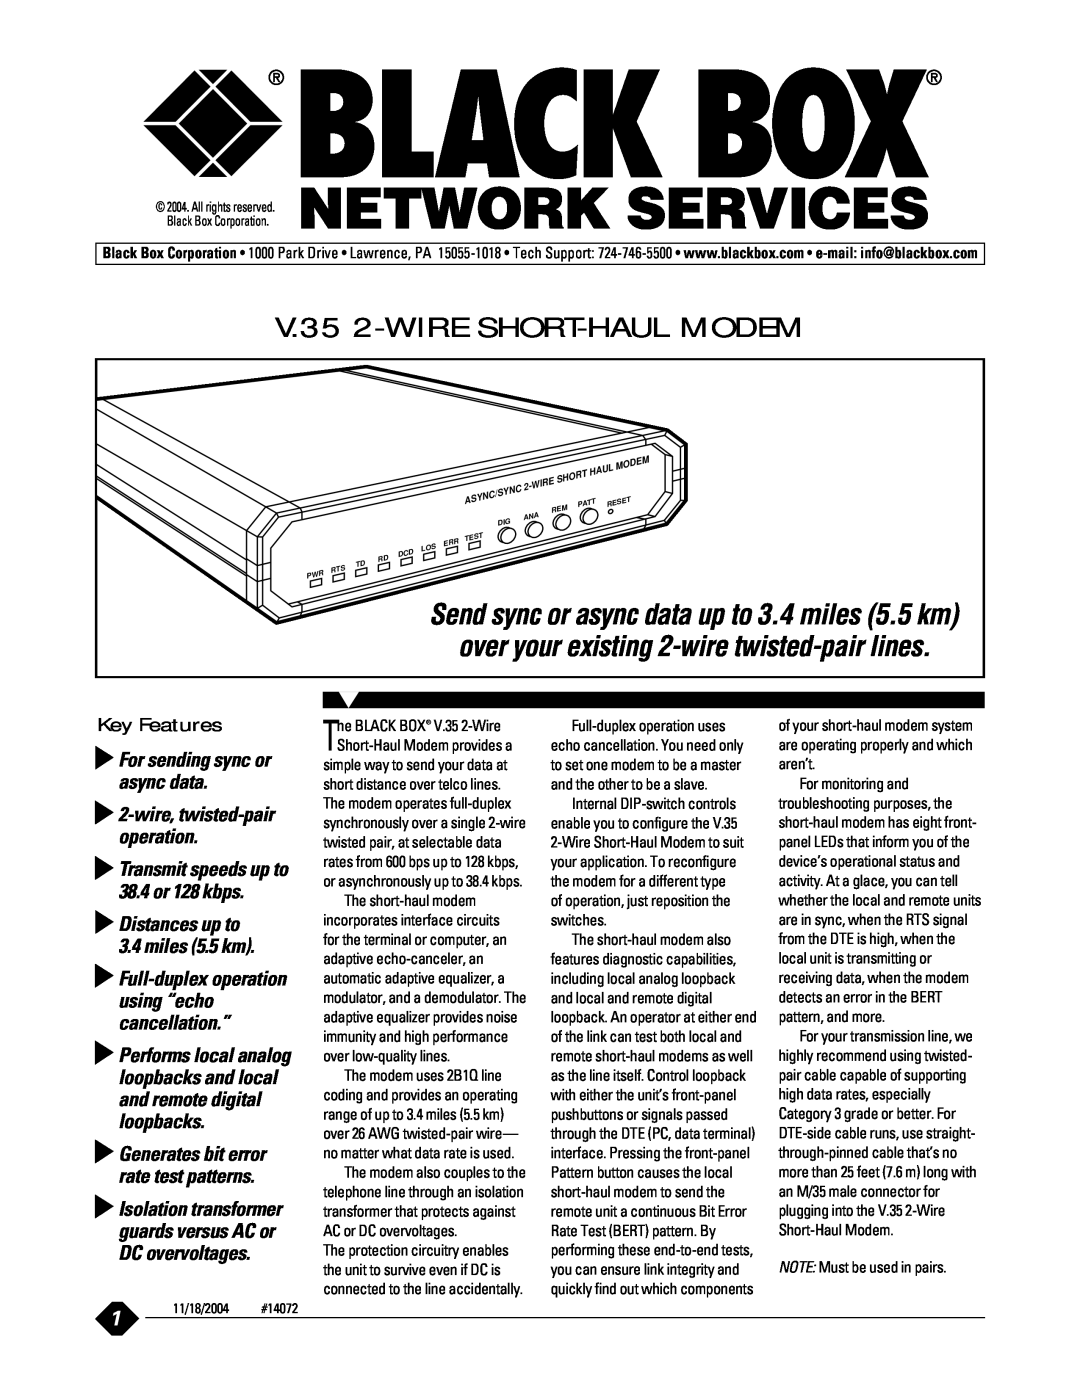 Black Box manual NOTE Must be used in pairs, V.35 2-WIRE SHORT-HAUL MODEM, Key Features, For sending sync or async data 